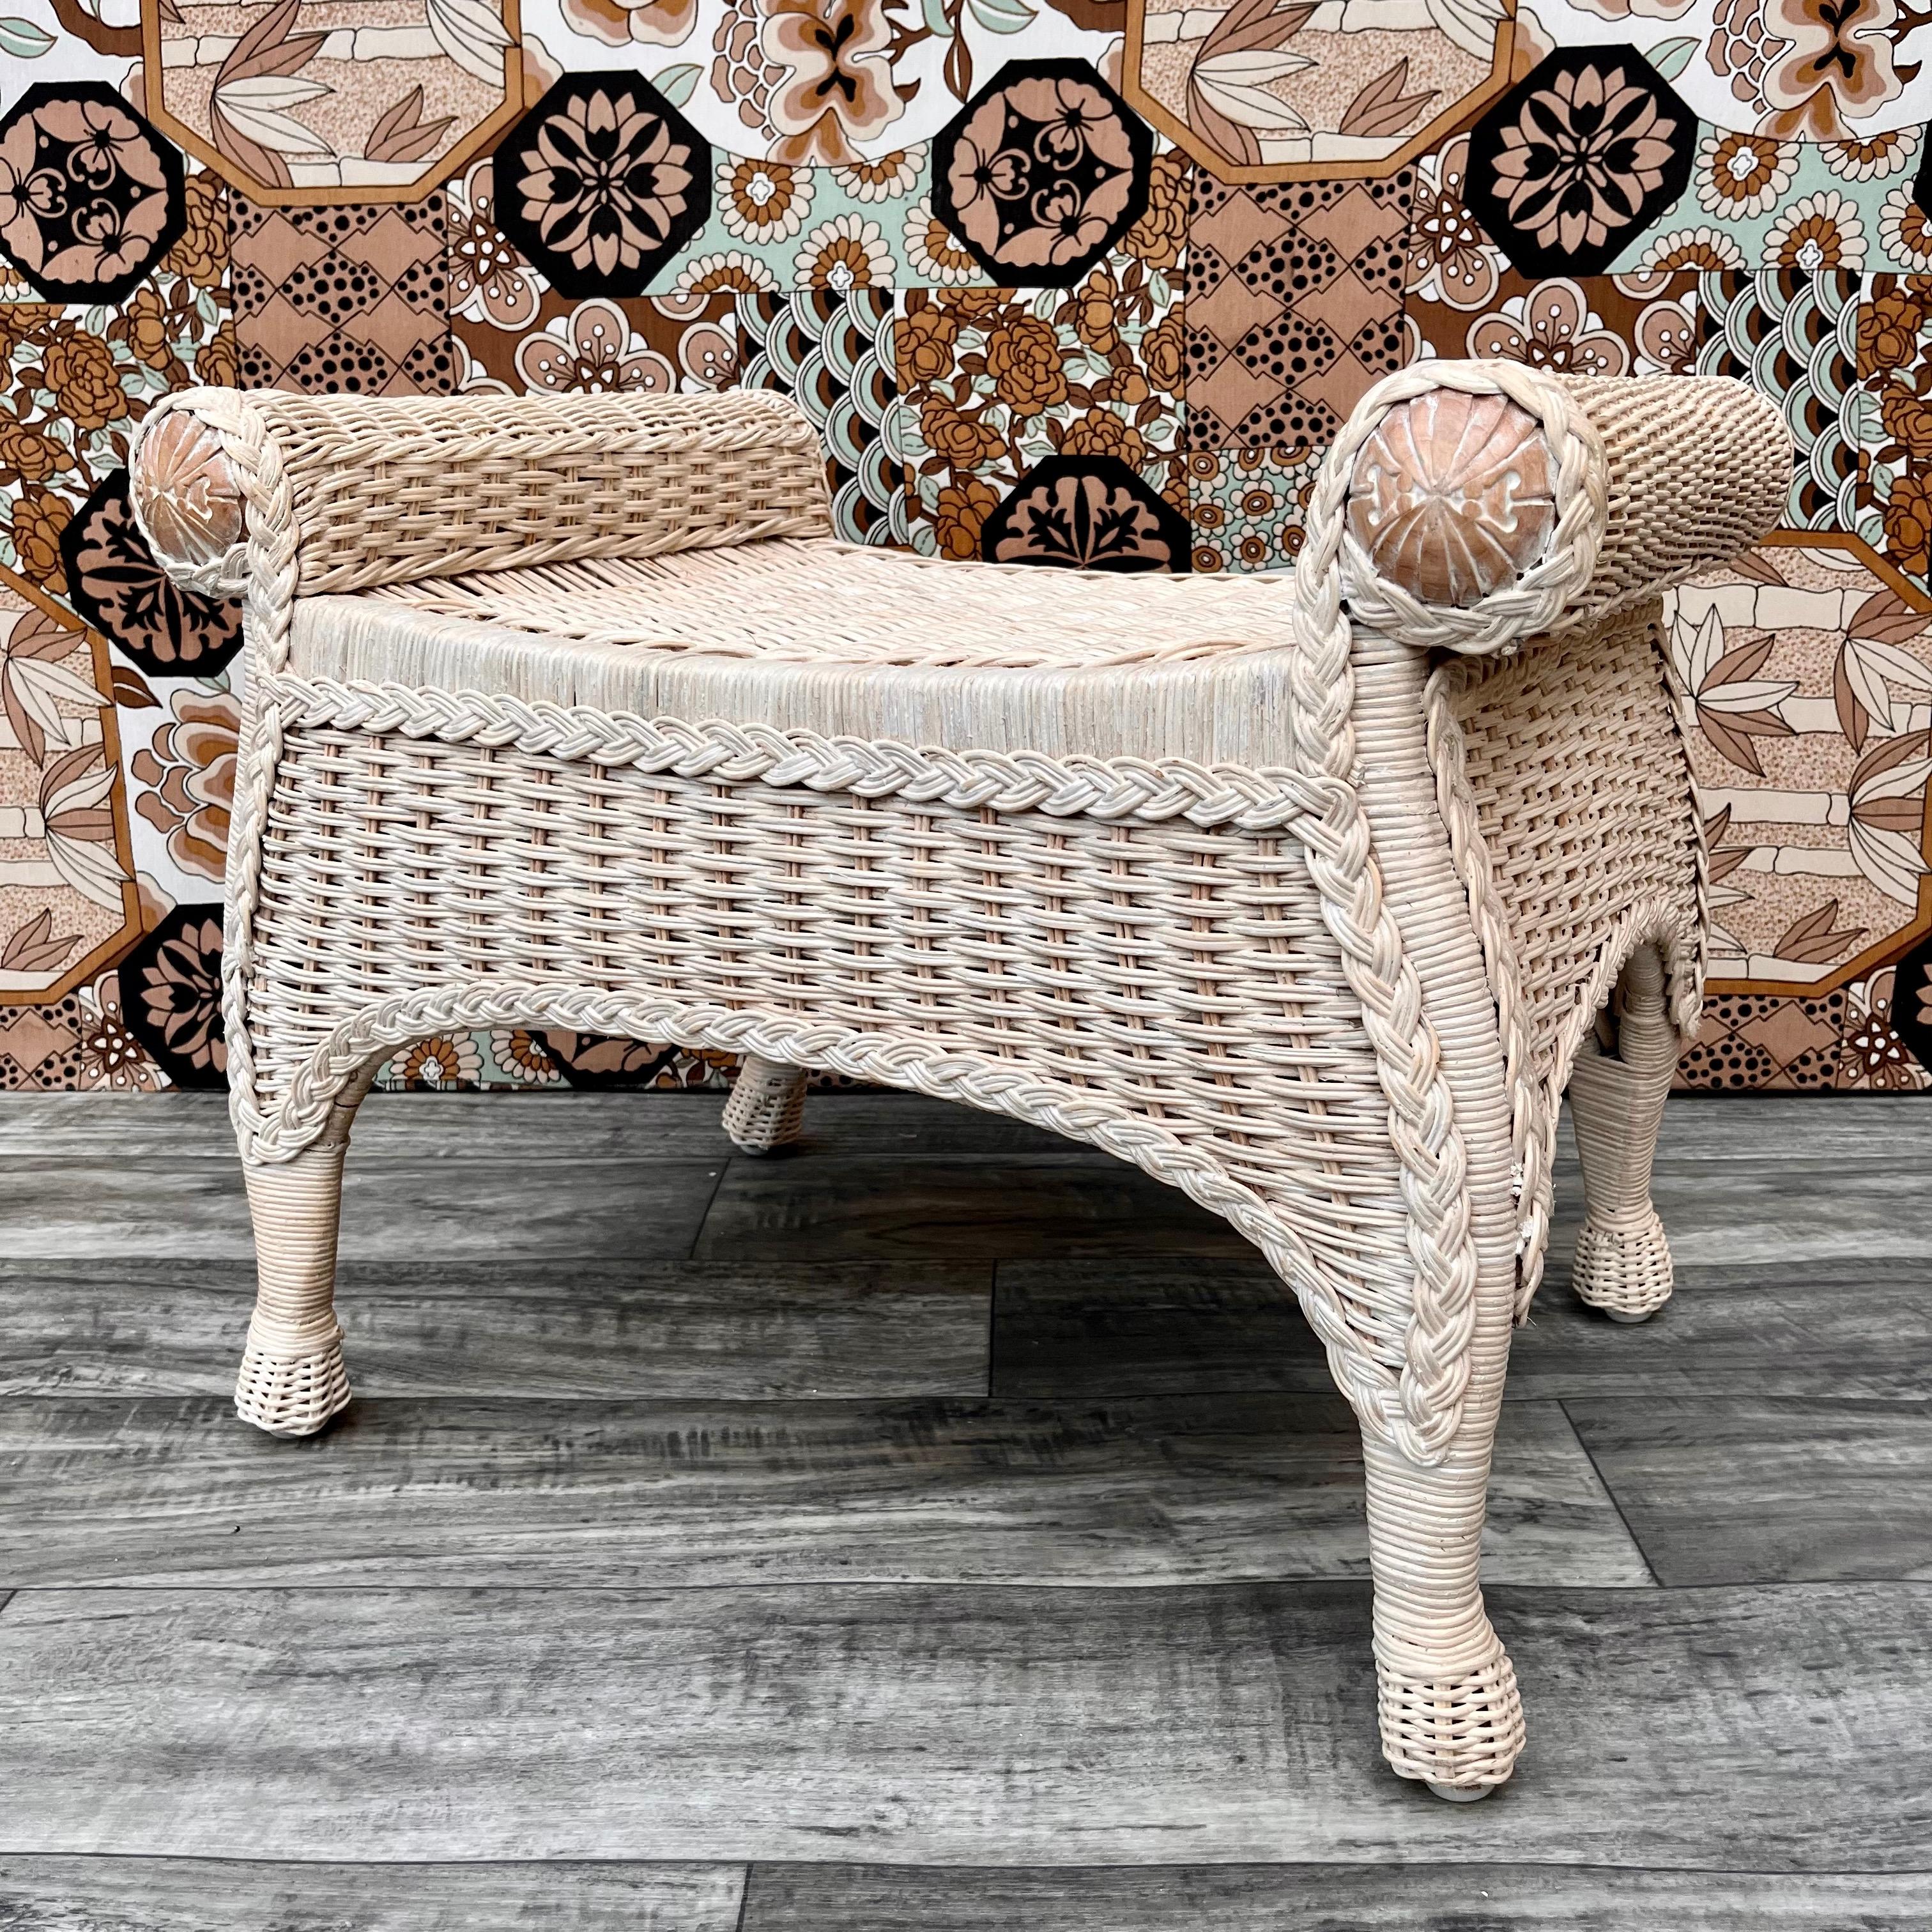 Vintage late 20th century Boho chic coastal style rattan vanity bench. Circa 1990s
Features a off white rattan body with carved wooden details on the scrolled ends.
In excellent near mint original condition with very minor signs of wear and age.